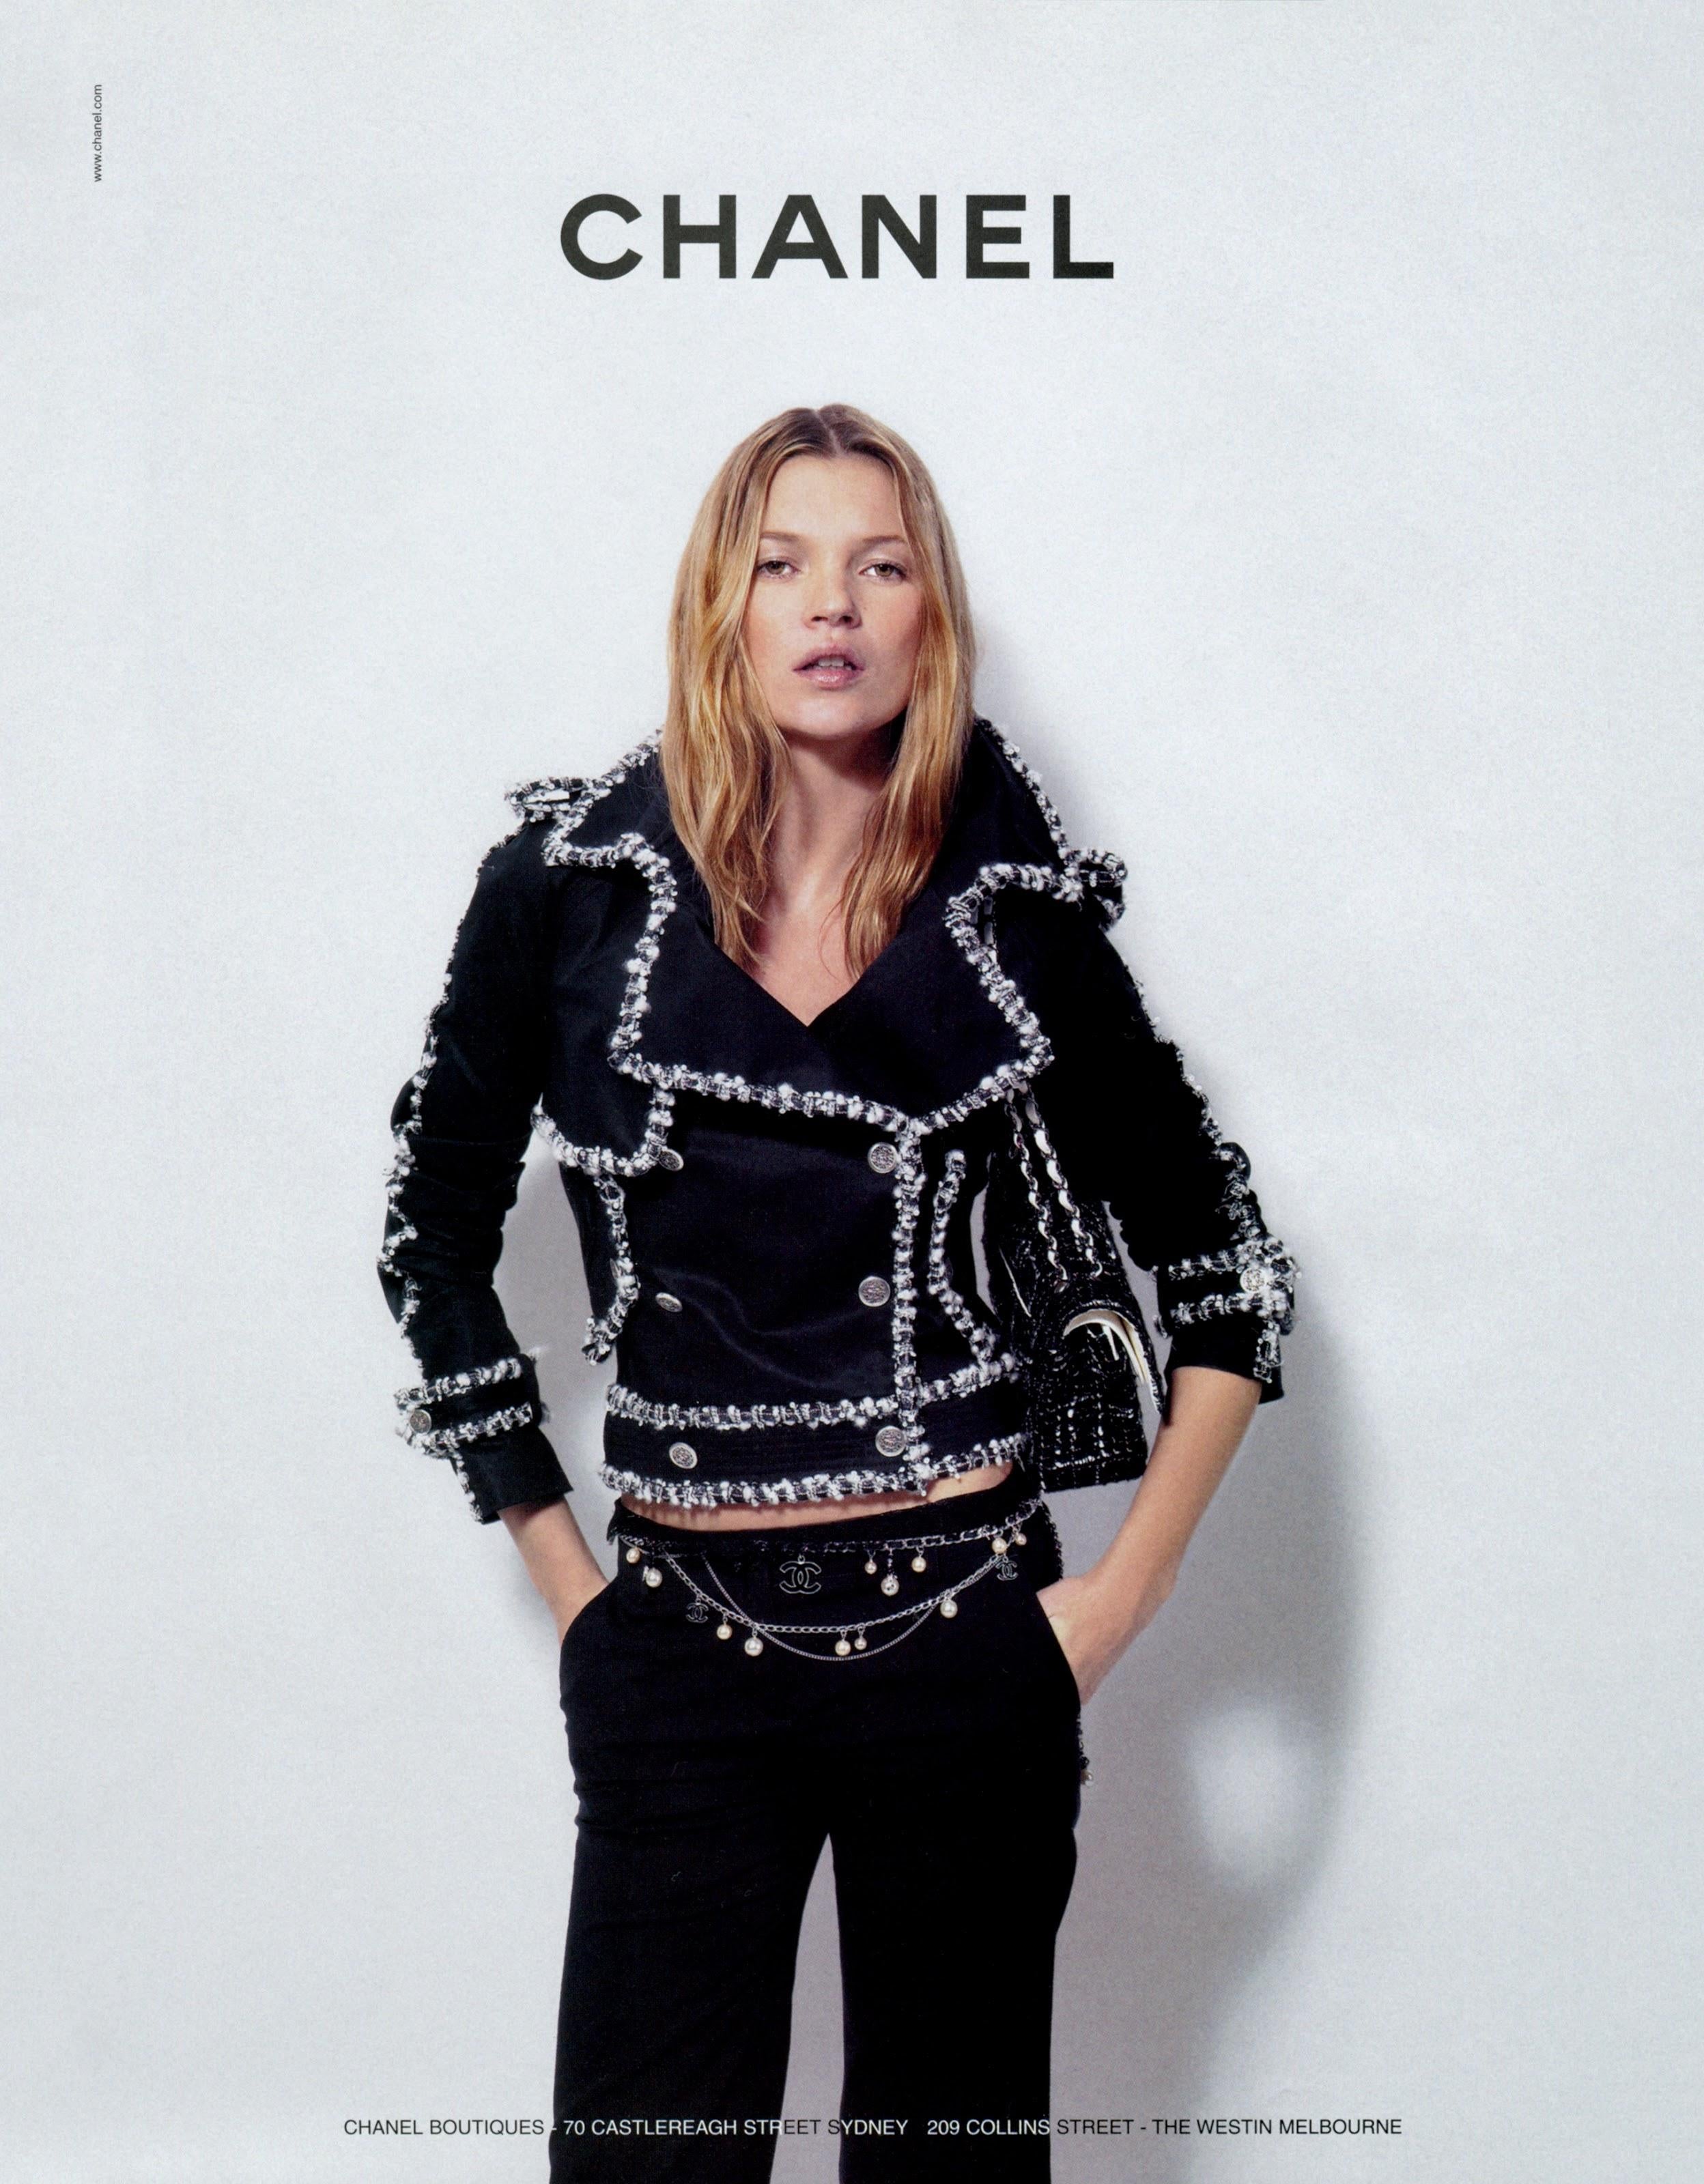 Extremely rare Iconic Chanel black trench coat with tweed and chain link trim from Runway of 2004 Spring / Summer Collection, 04P, 04S
Presented in iconic ad campaign featuring supermodel Kate Moss!
As seen on many celebs, inlc. Madonna. 
Highly